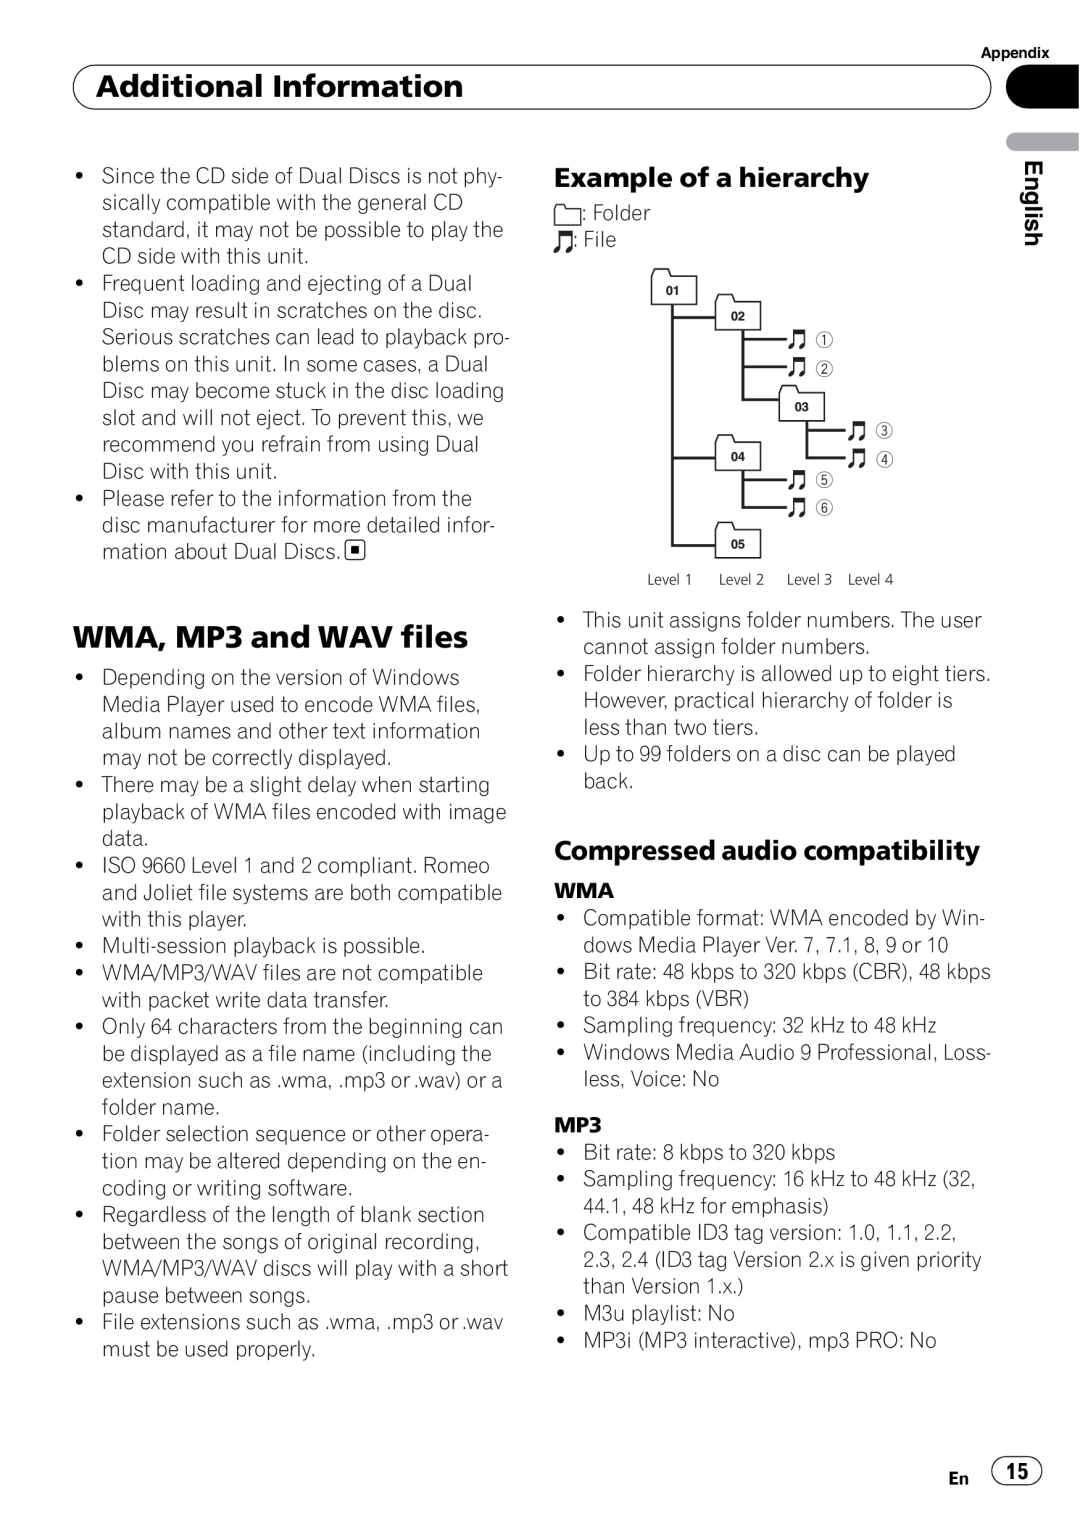 Pioneer DEH-1900MP WMA, MP3 and WAV files, Example of a hierarchy, Compressed audio compatibility, Additional Information 